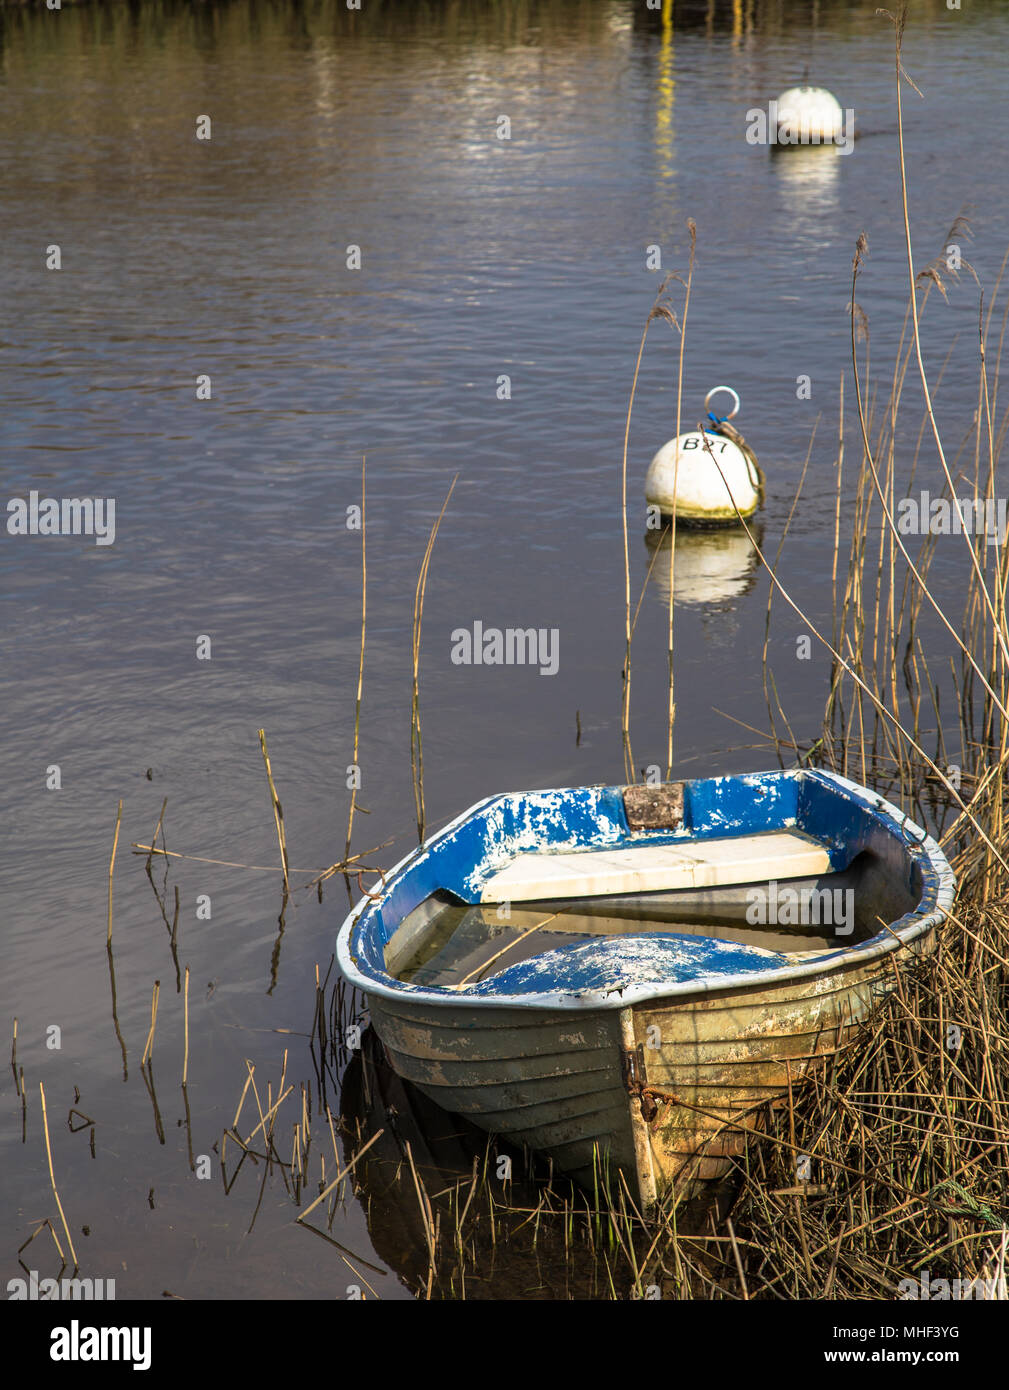 Boat floating on River with Buoys beyond. Peaceful, artistic image Stock Photo